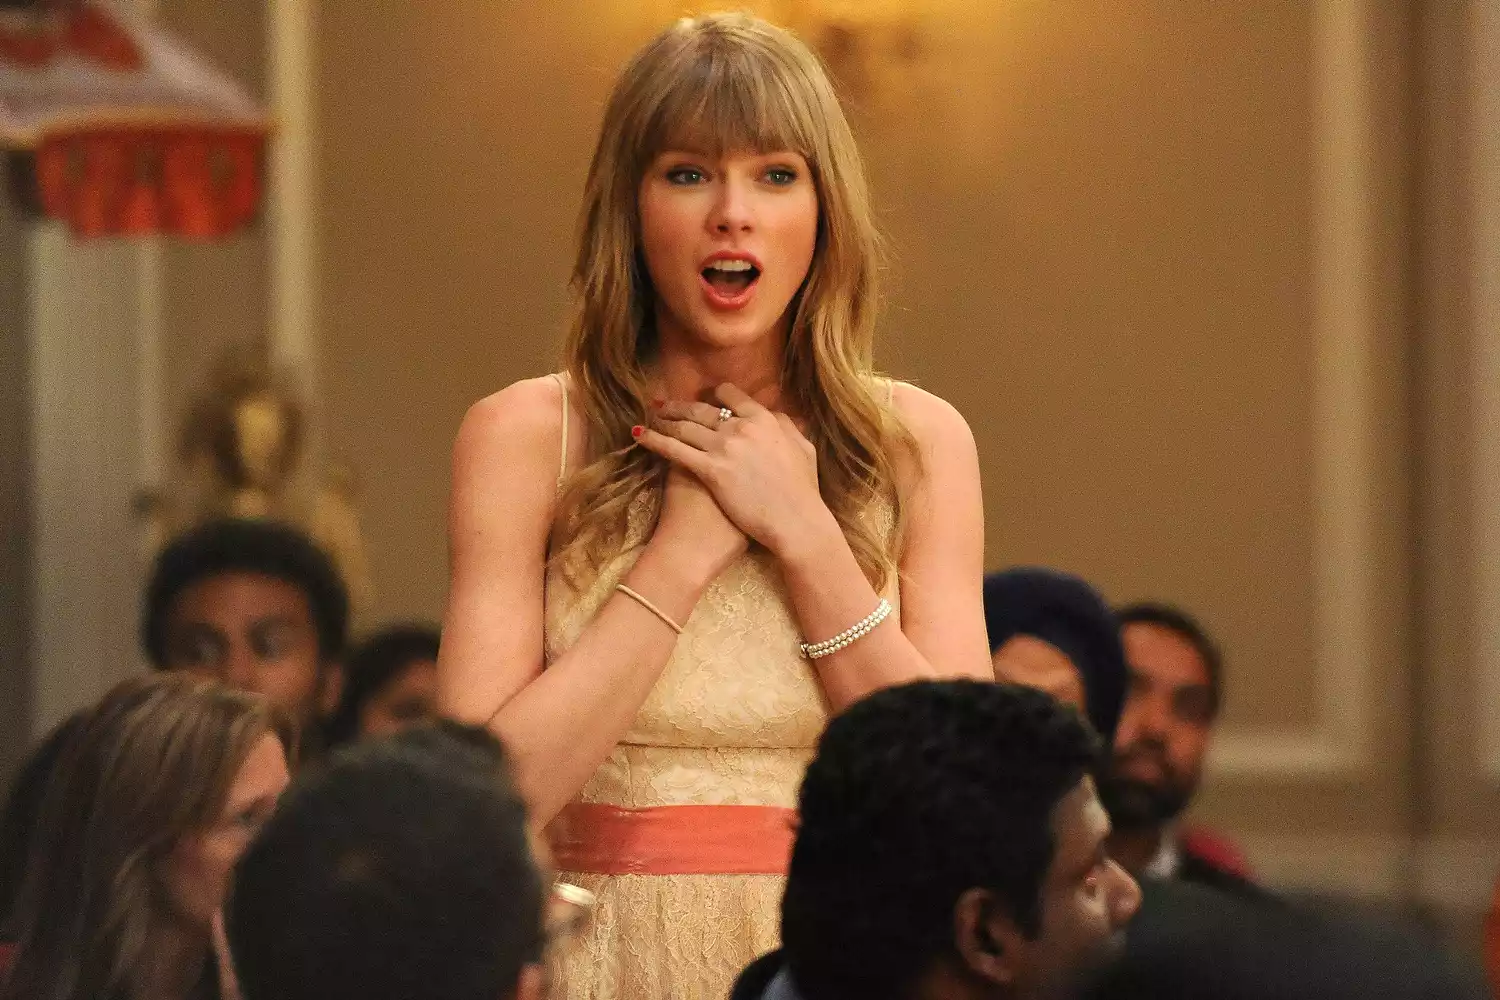 Taylor Swift guest-stars in the Elaine's Big Day season finale episode of NEW GIRL airing Tuesday, May 14, 2013 